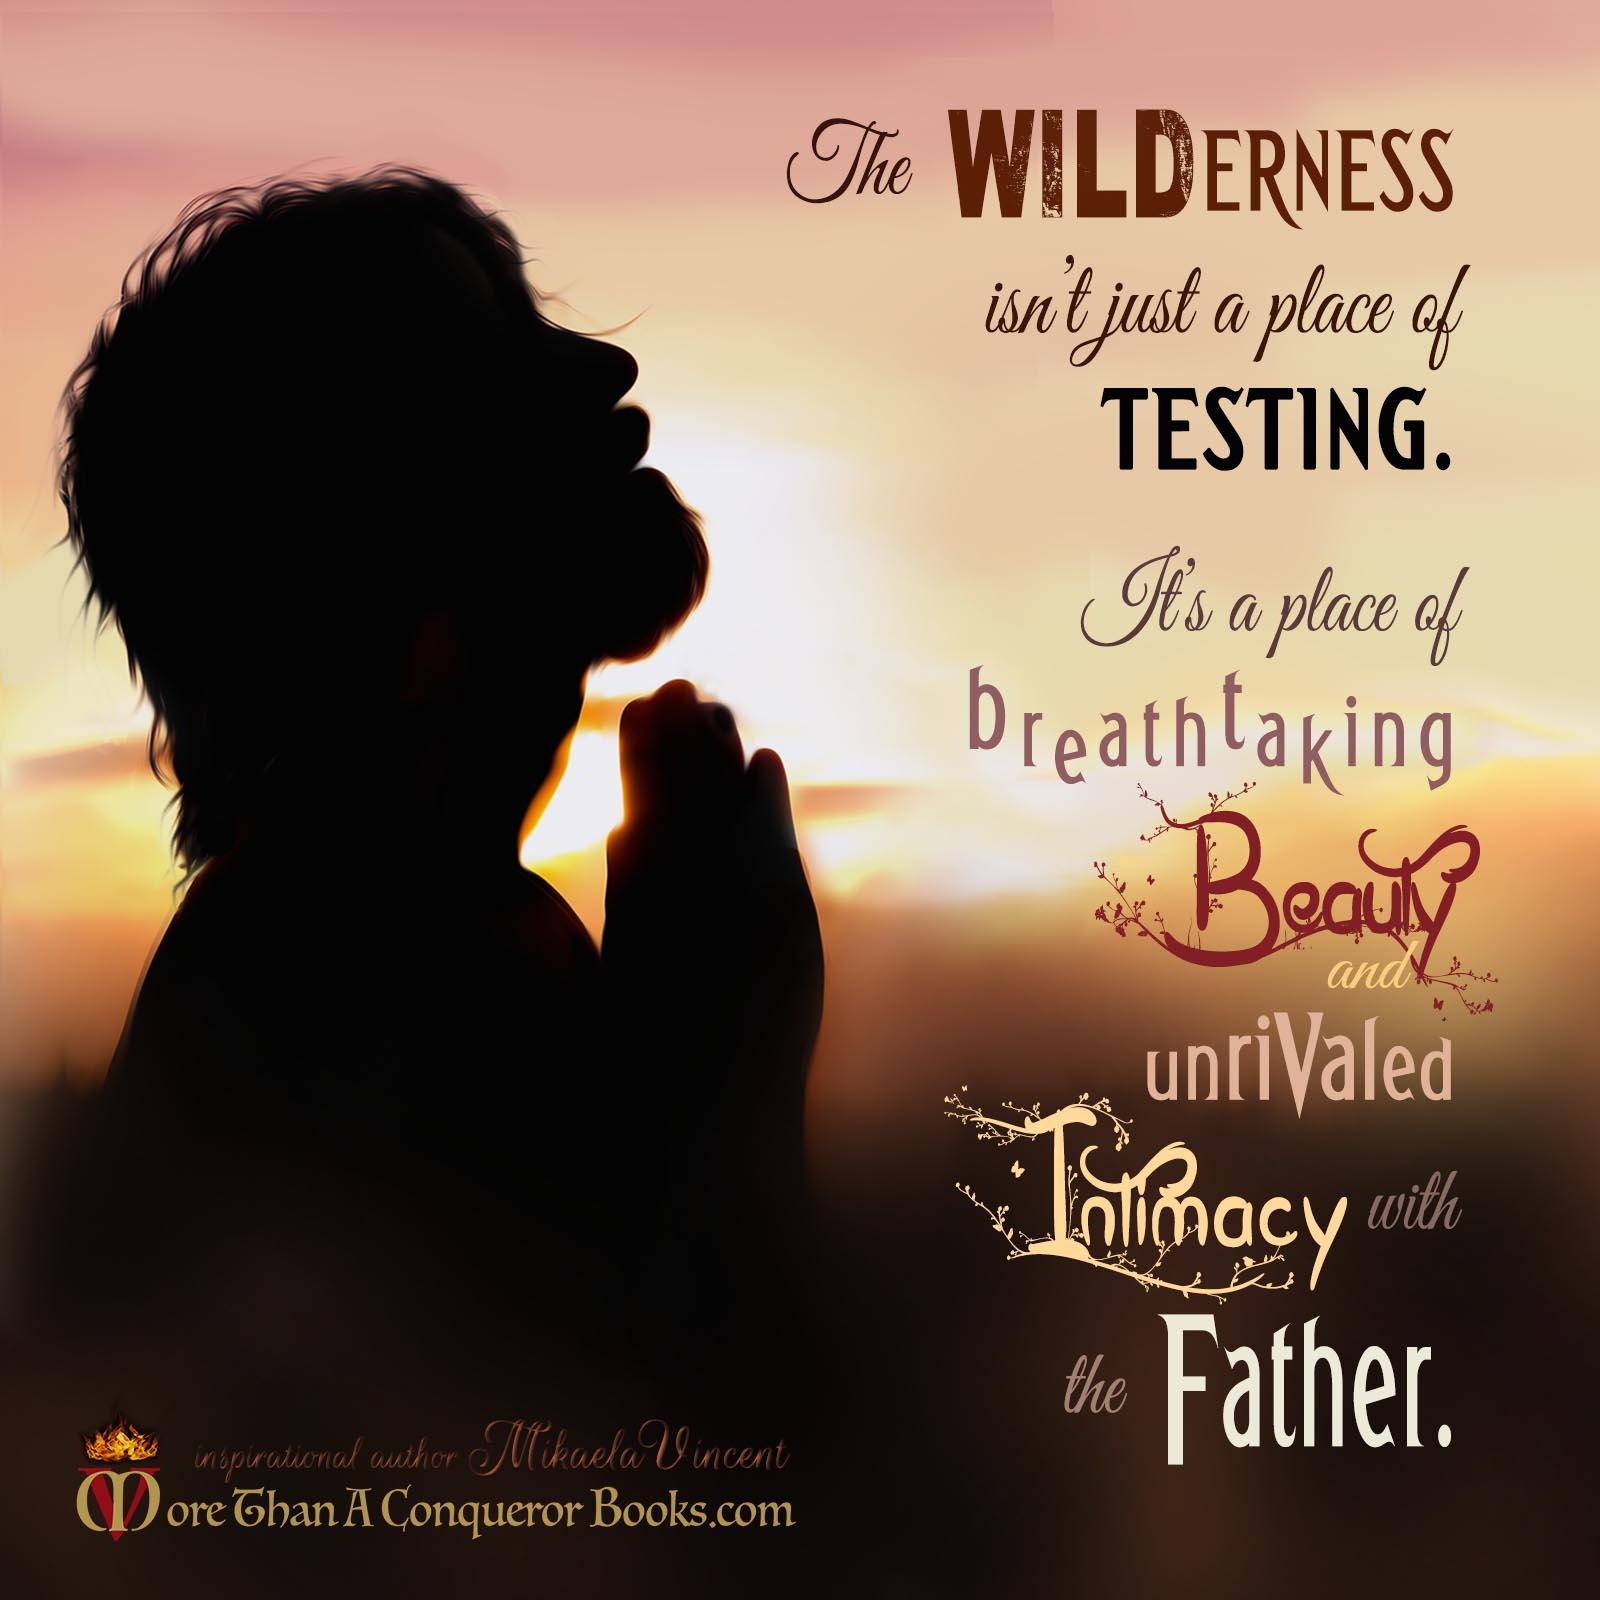 The wilderness isn't just testing-beauty-intimacy-Father-Mikaela Vincent-MoreThanAConquerorBooks.jpg